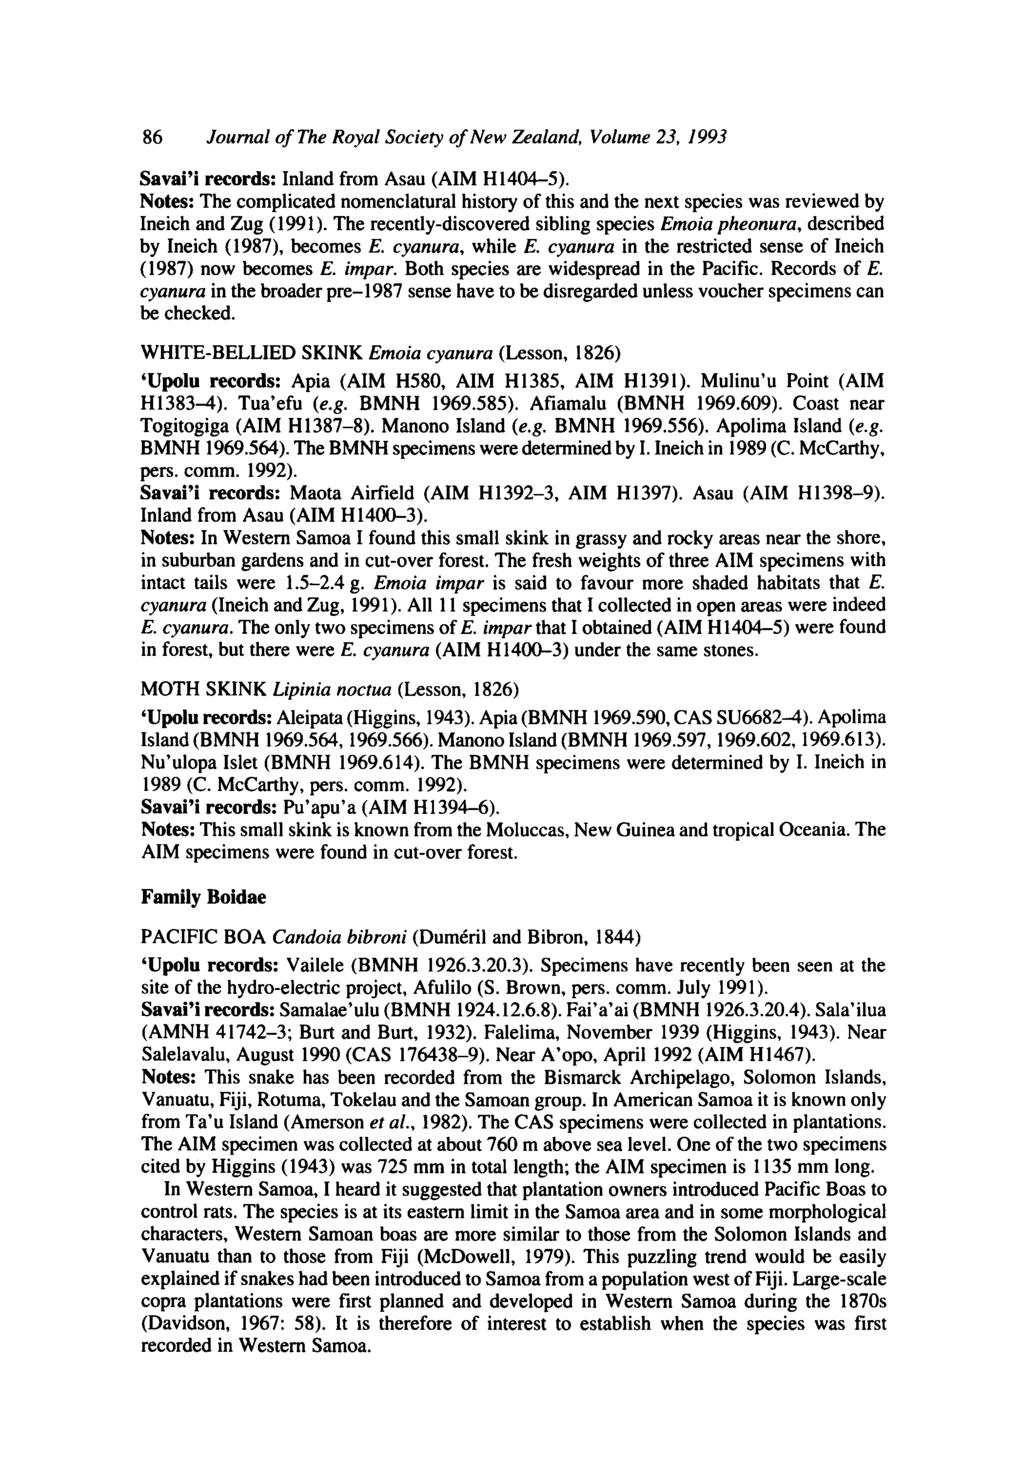 86 Journal of The Royal Society of New Zealand, Volume 23, 1993 Savai'i records: Inland from Asau (AIM Hl404-5).